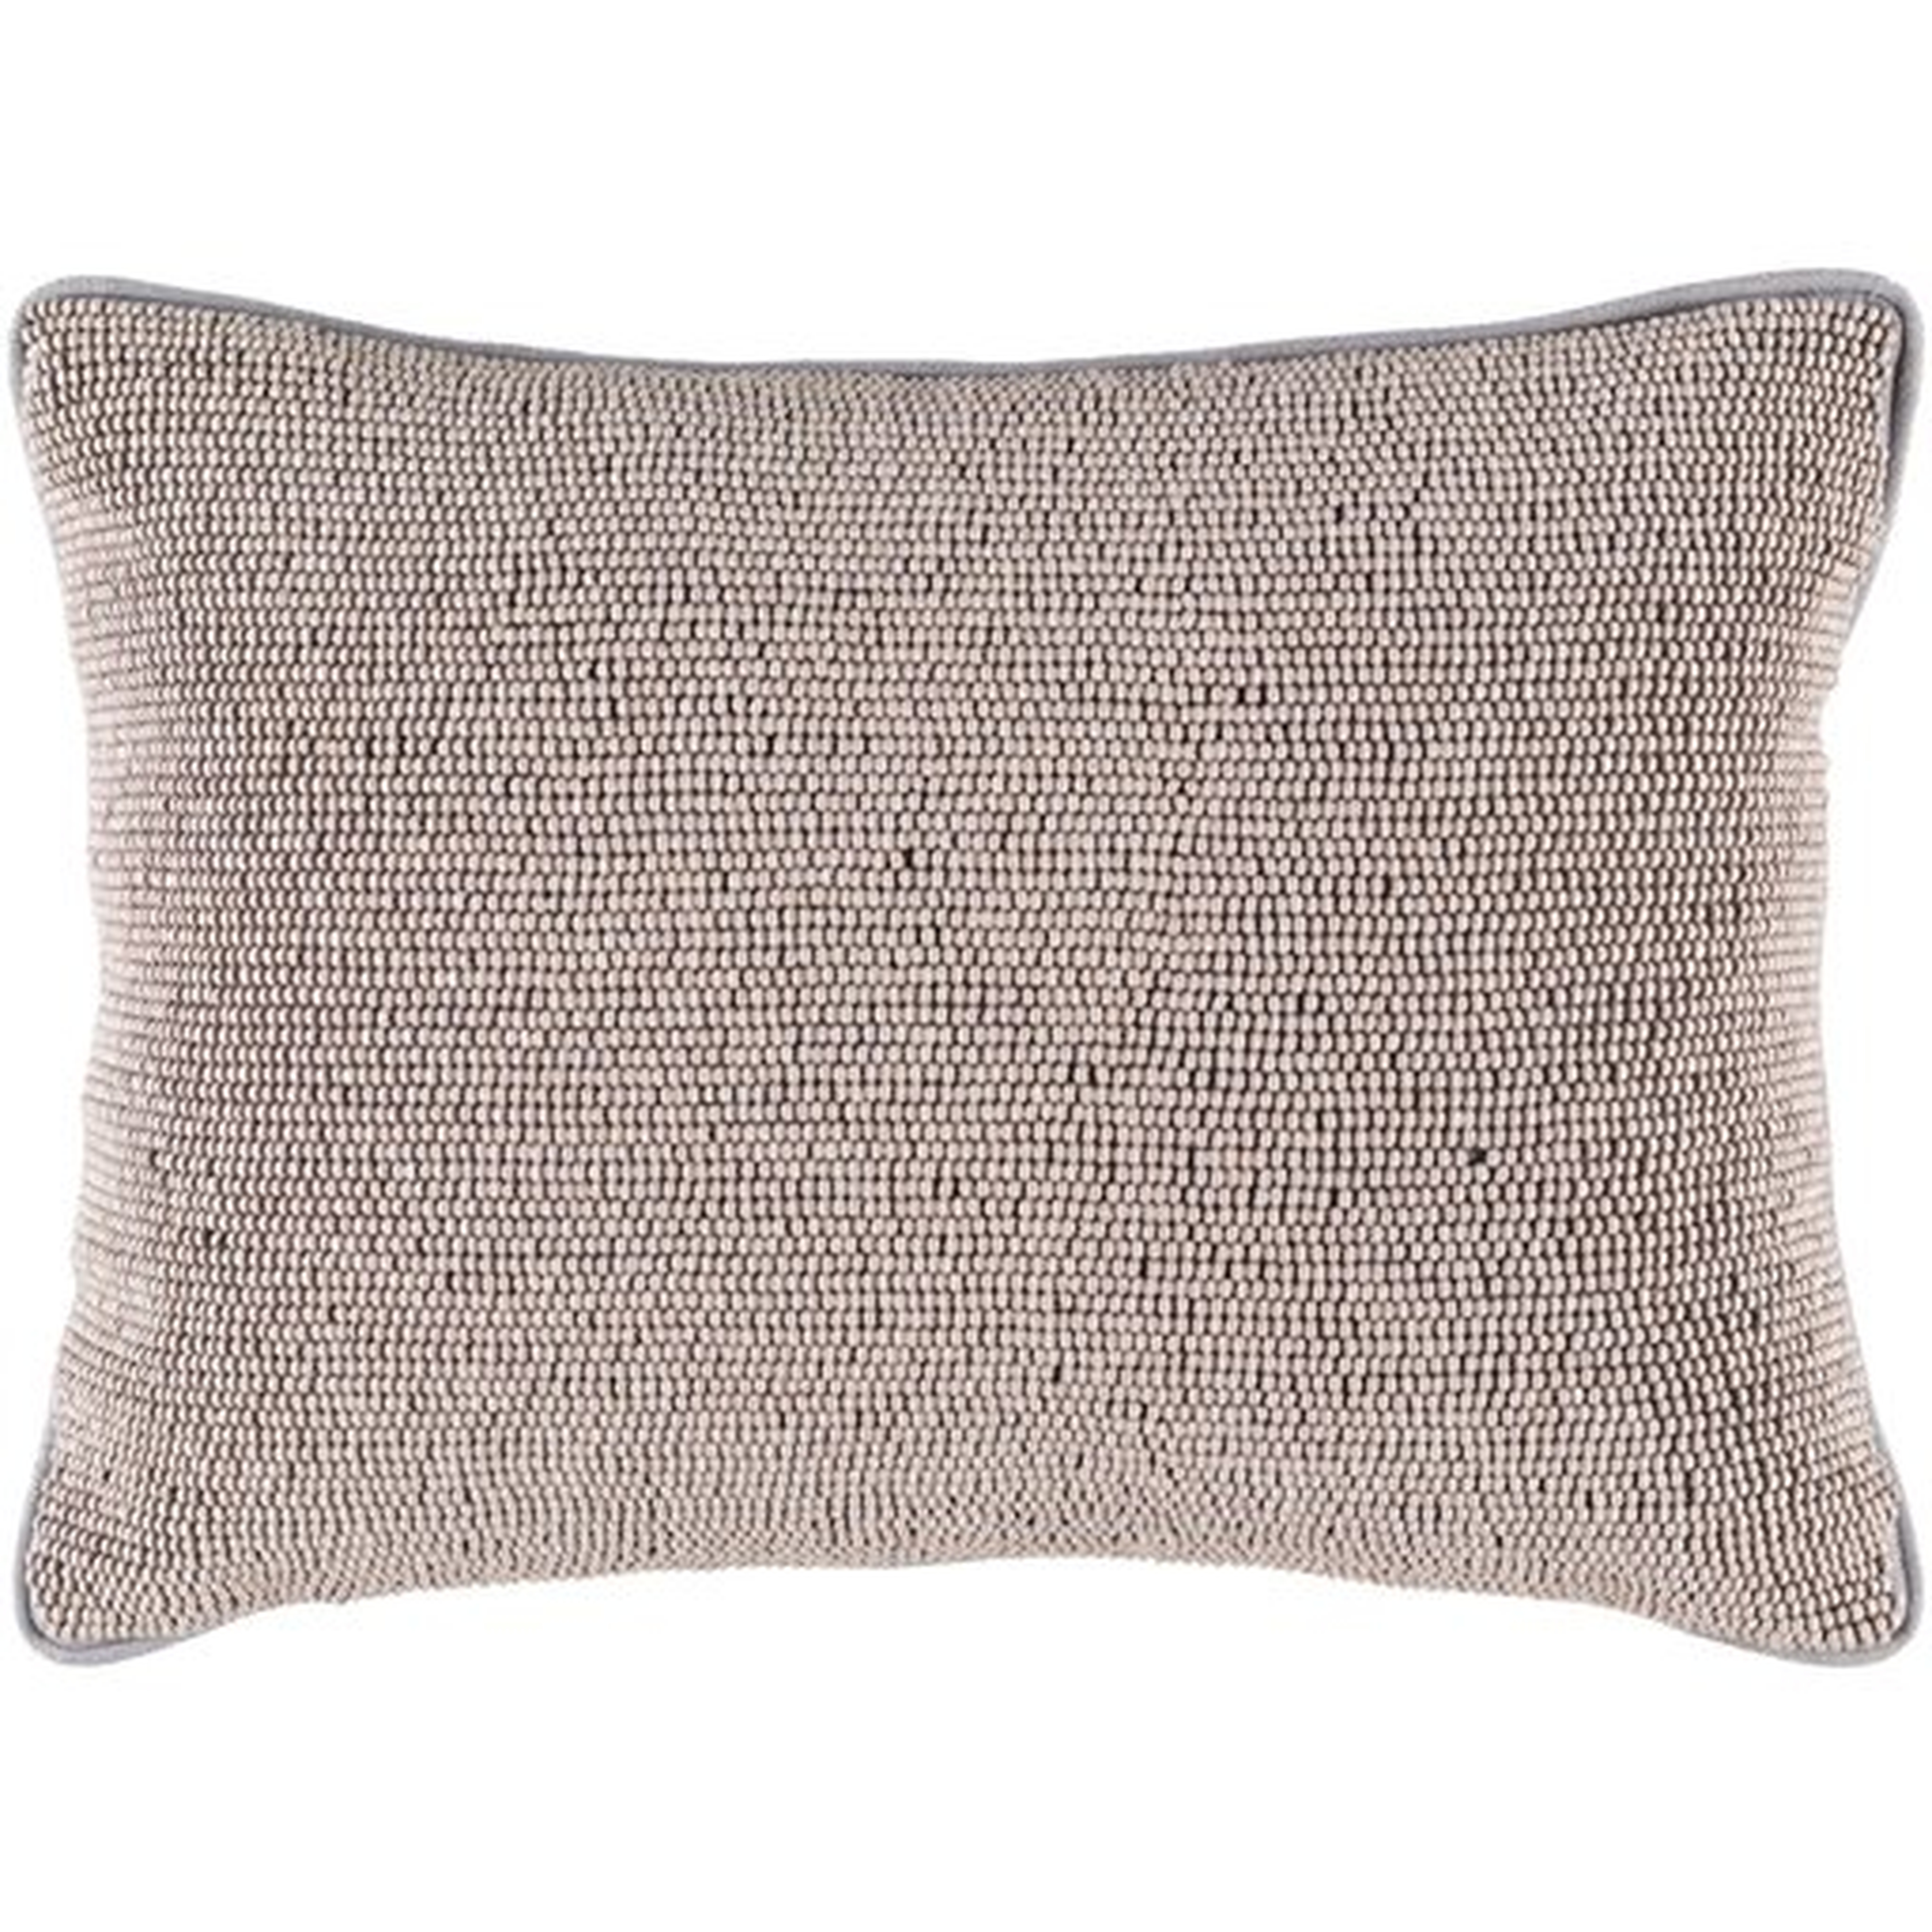 Lark Throw Pillow, Small, pillow cover only - Surya